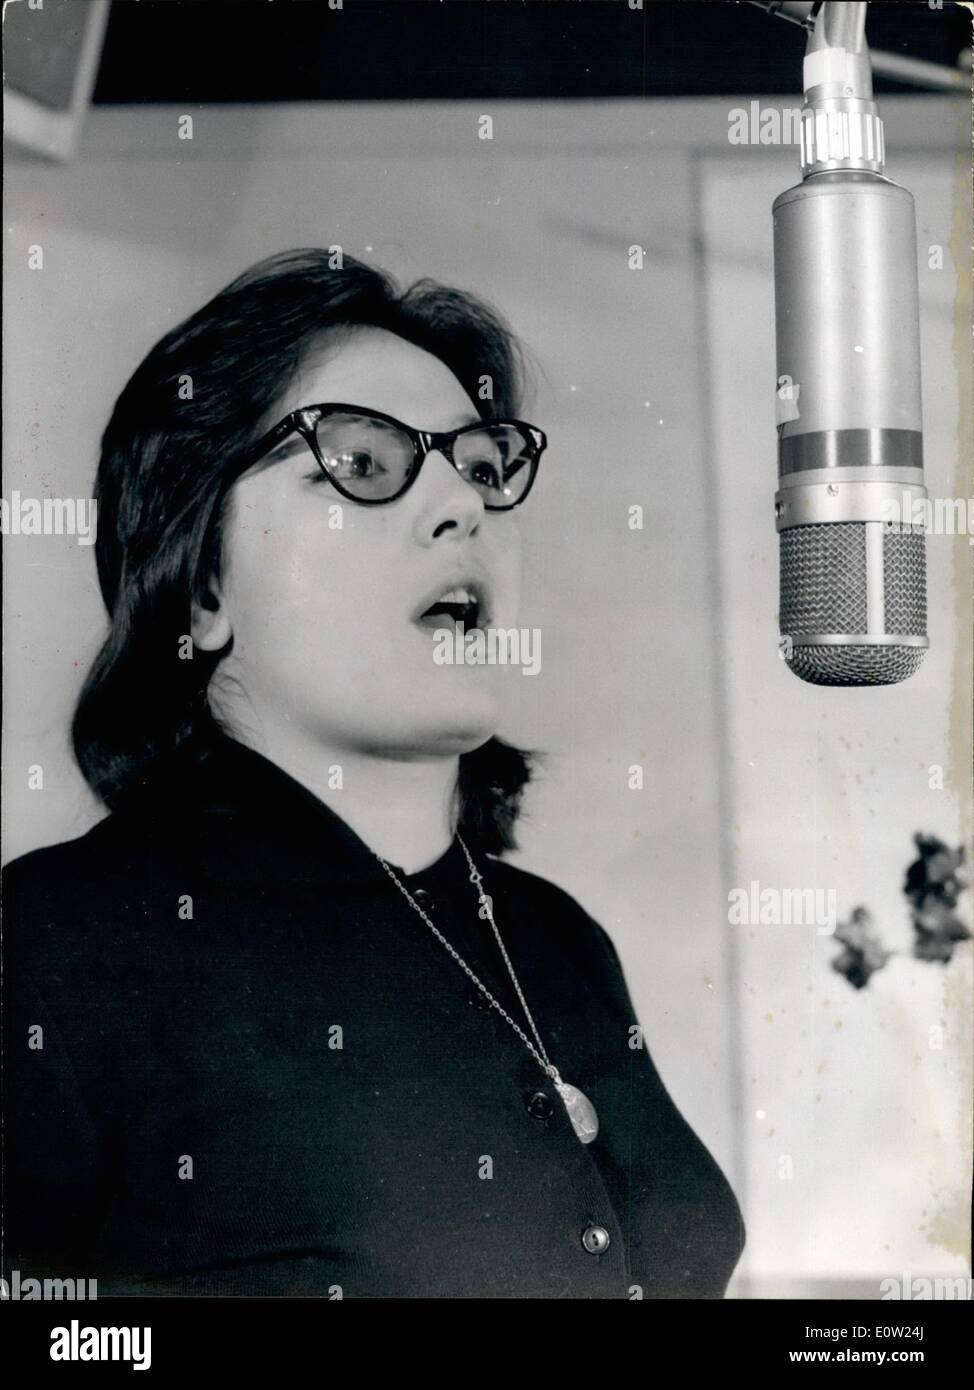 Feb. 02, 1961 - Greek Singer Makes a Hit.: Nana Mouskouri, the famous Greek Singer who first achieved fame singing ''The Children of Piraeus'' is now in Paris. Photo shows Nana Mouskouri singing for the first time a song a French which made a hit in Paris. Stock Photo